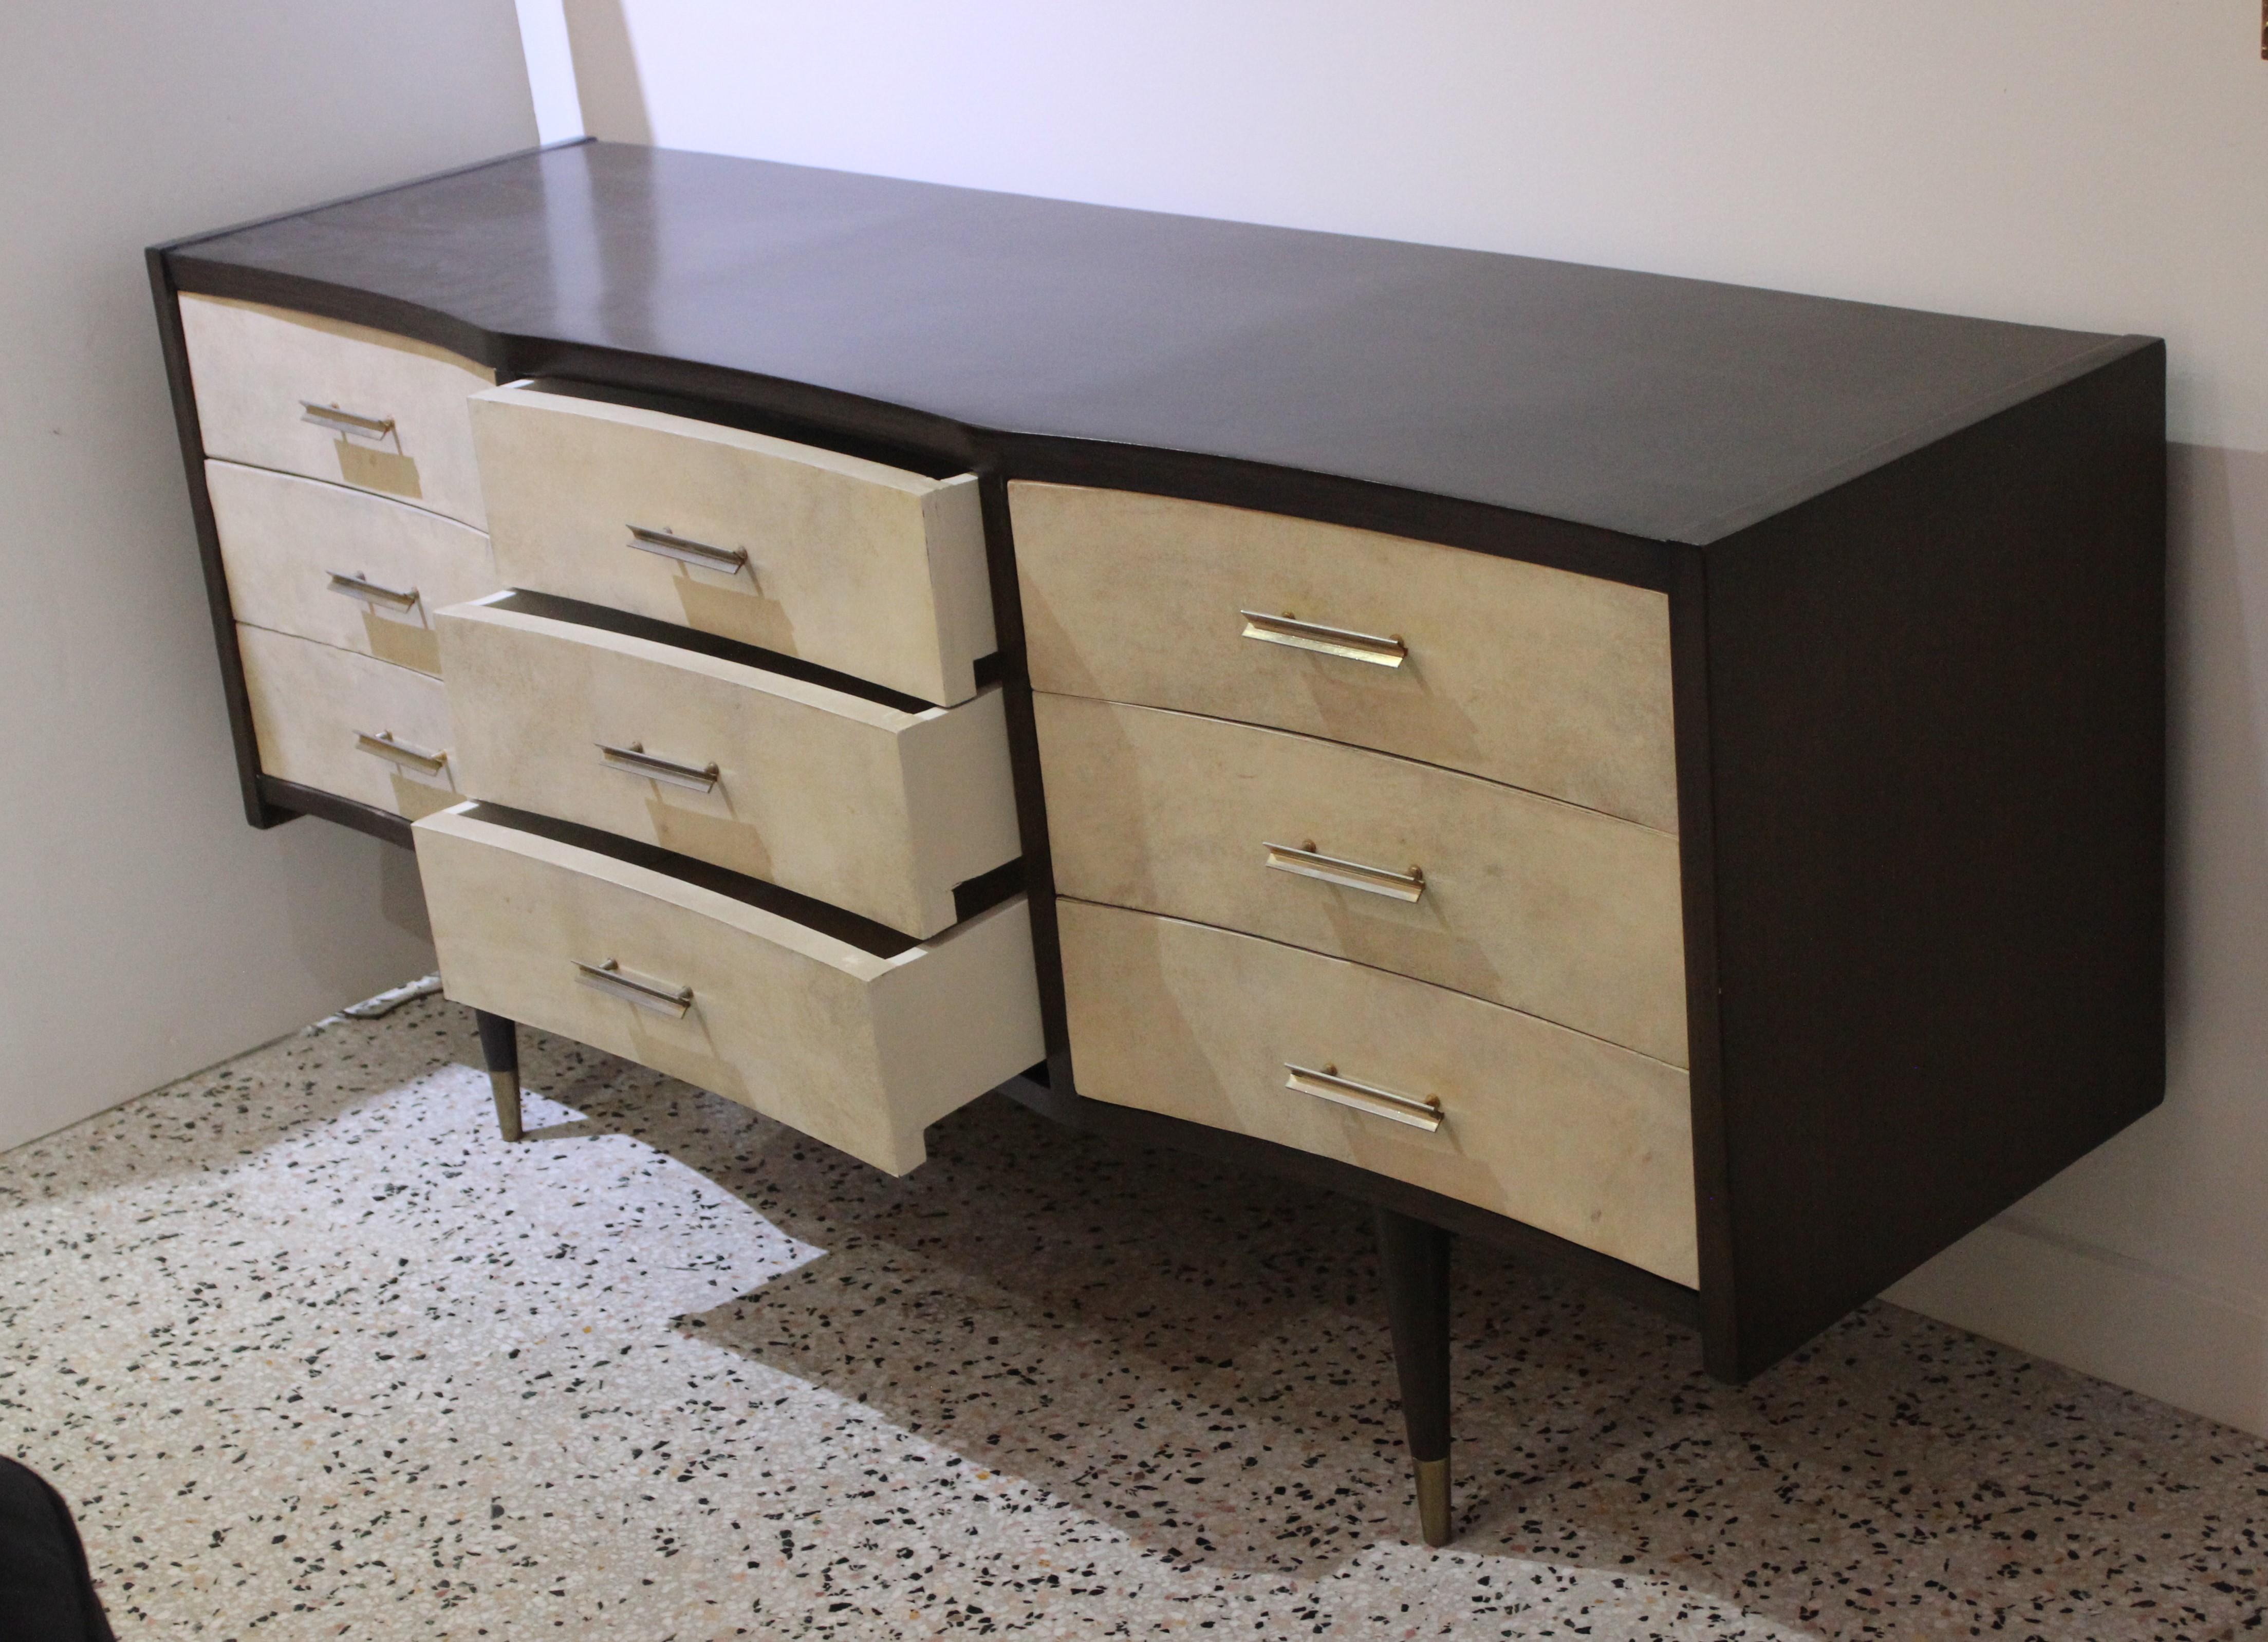 This stylish chest of drawers is very much in the style of pieces created by Gio Ponti in the mid-20th century. The piece has been professional restored as of June 2020. The concave drawer fronts are covered in a light colored beige parchment